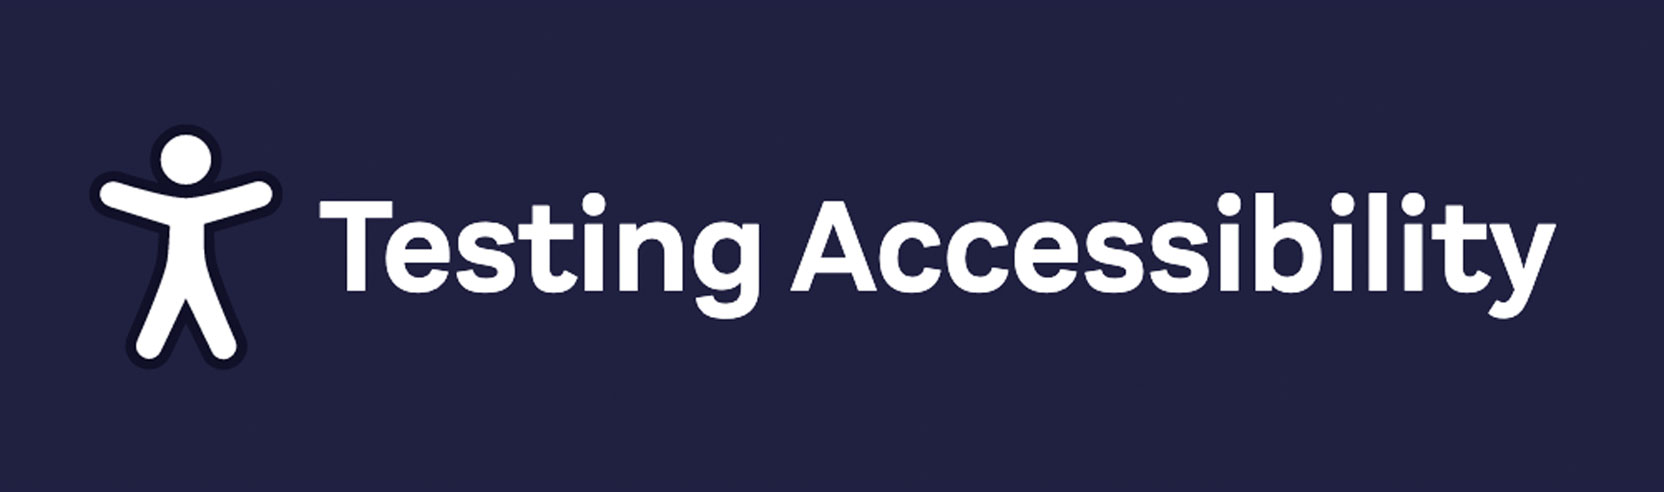 Testing Accessibility by Marcy Sutton logo